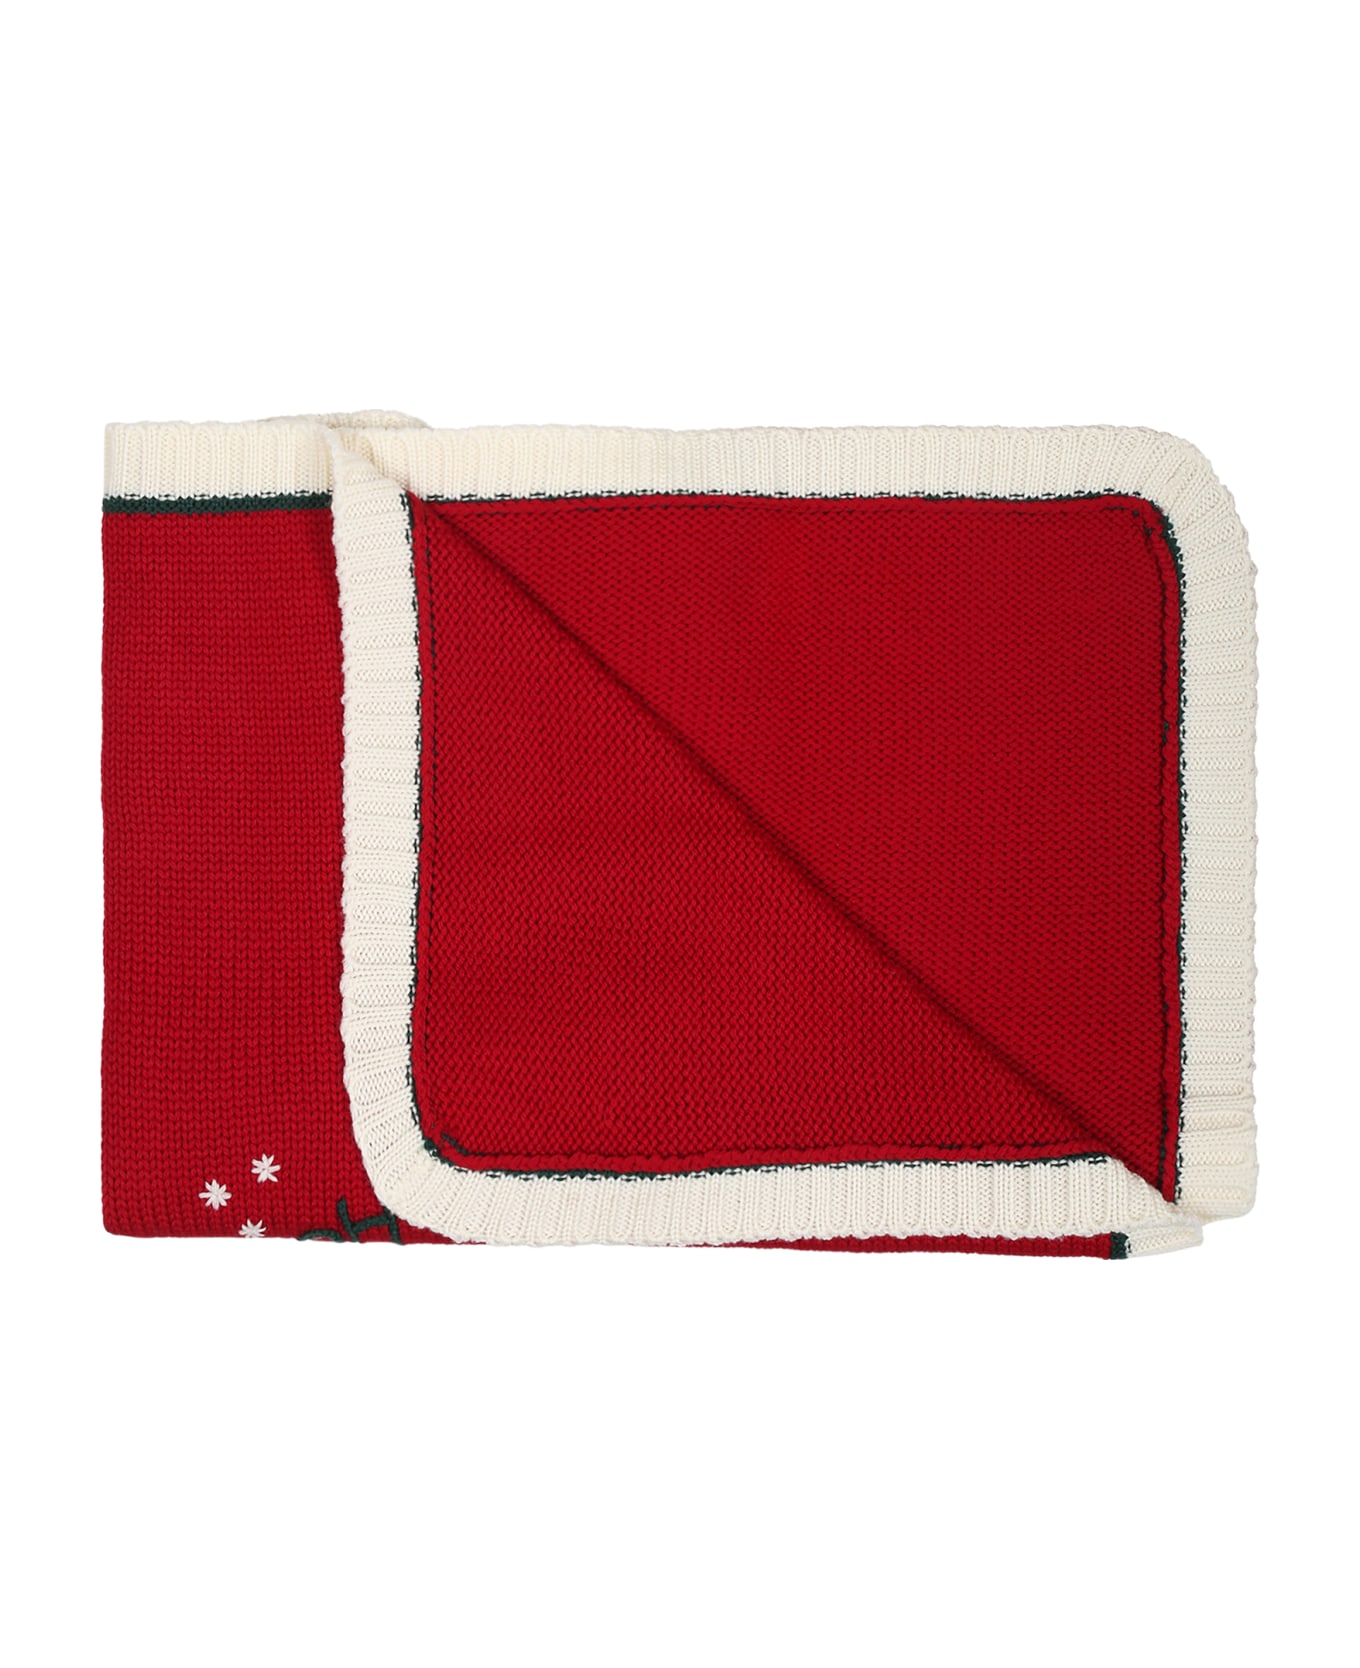 La stupenderia Red Blanket For Babykids With Writing - Red アクセサリー＆ギフト